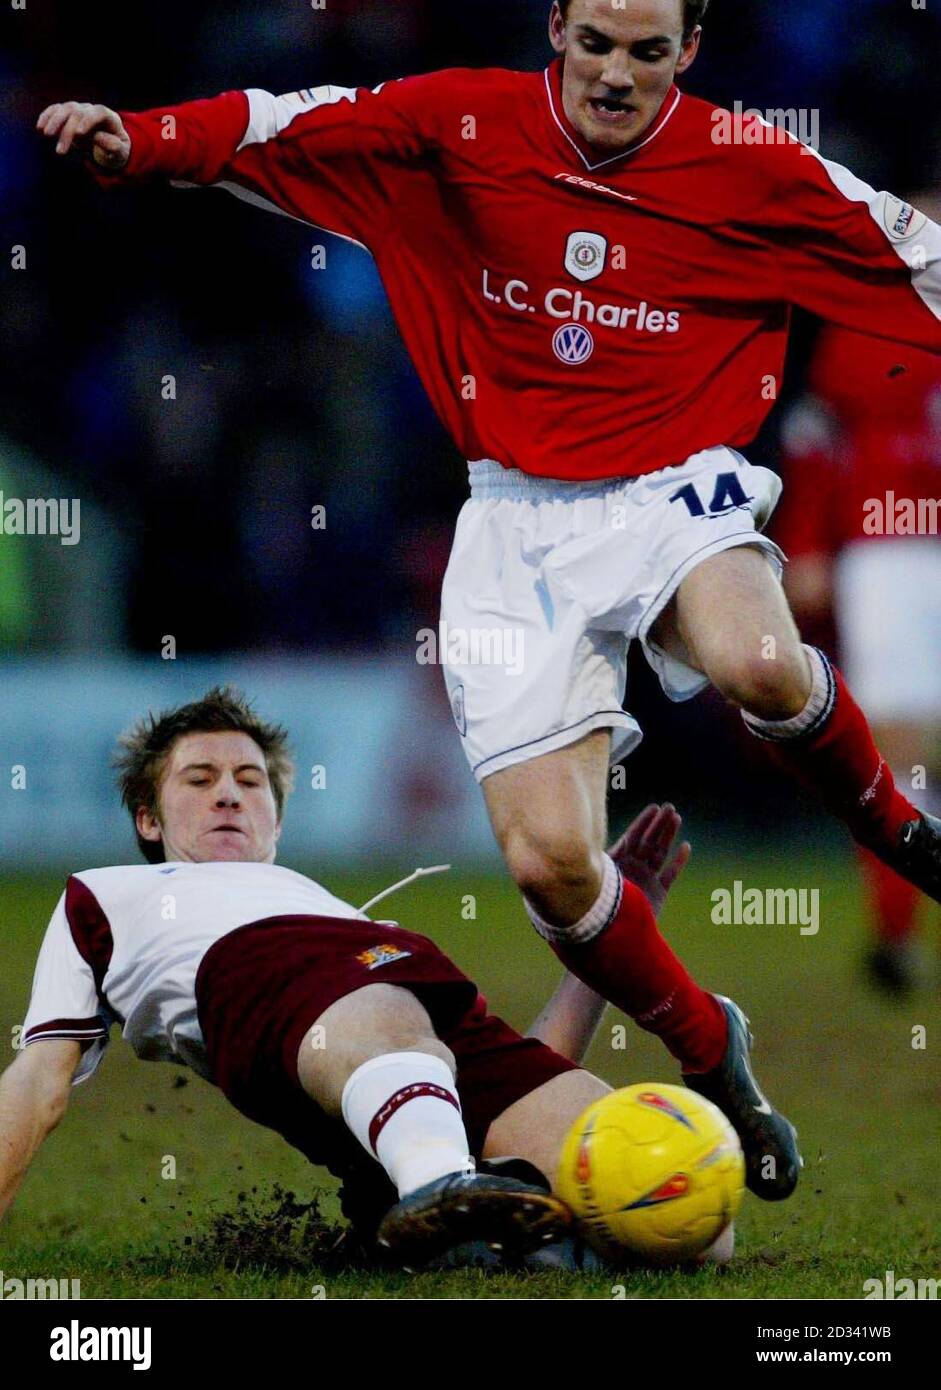 Northampton Town's Greg Lincoln (L) and Crewe Alexandra's David Vaughn during their Nationwide Division Two match at Crewe's Gresty Road ground. Finalscore Crewe 3 Northampton 3. THIS PICTURE CAN ONLY BE USED WITHIN THE CONTEXT OF AN EDITORIAL FEATURE. NO UNOFFICIAL CLUB WEBSITE USE. Stock Photo